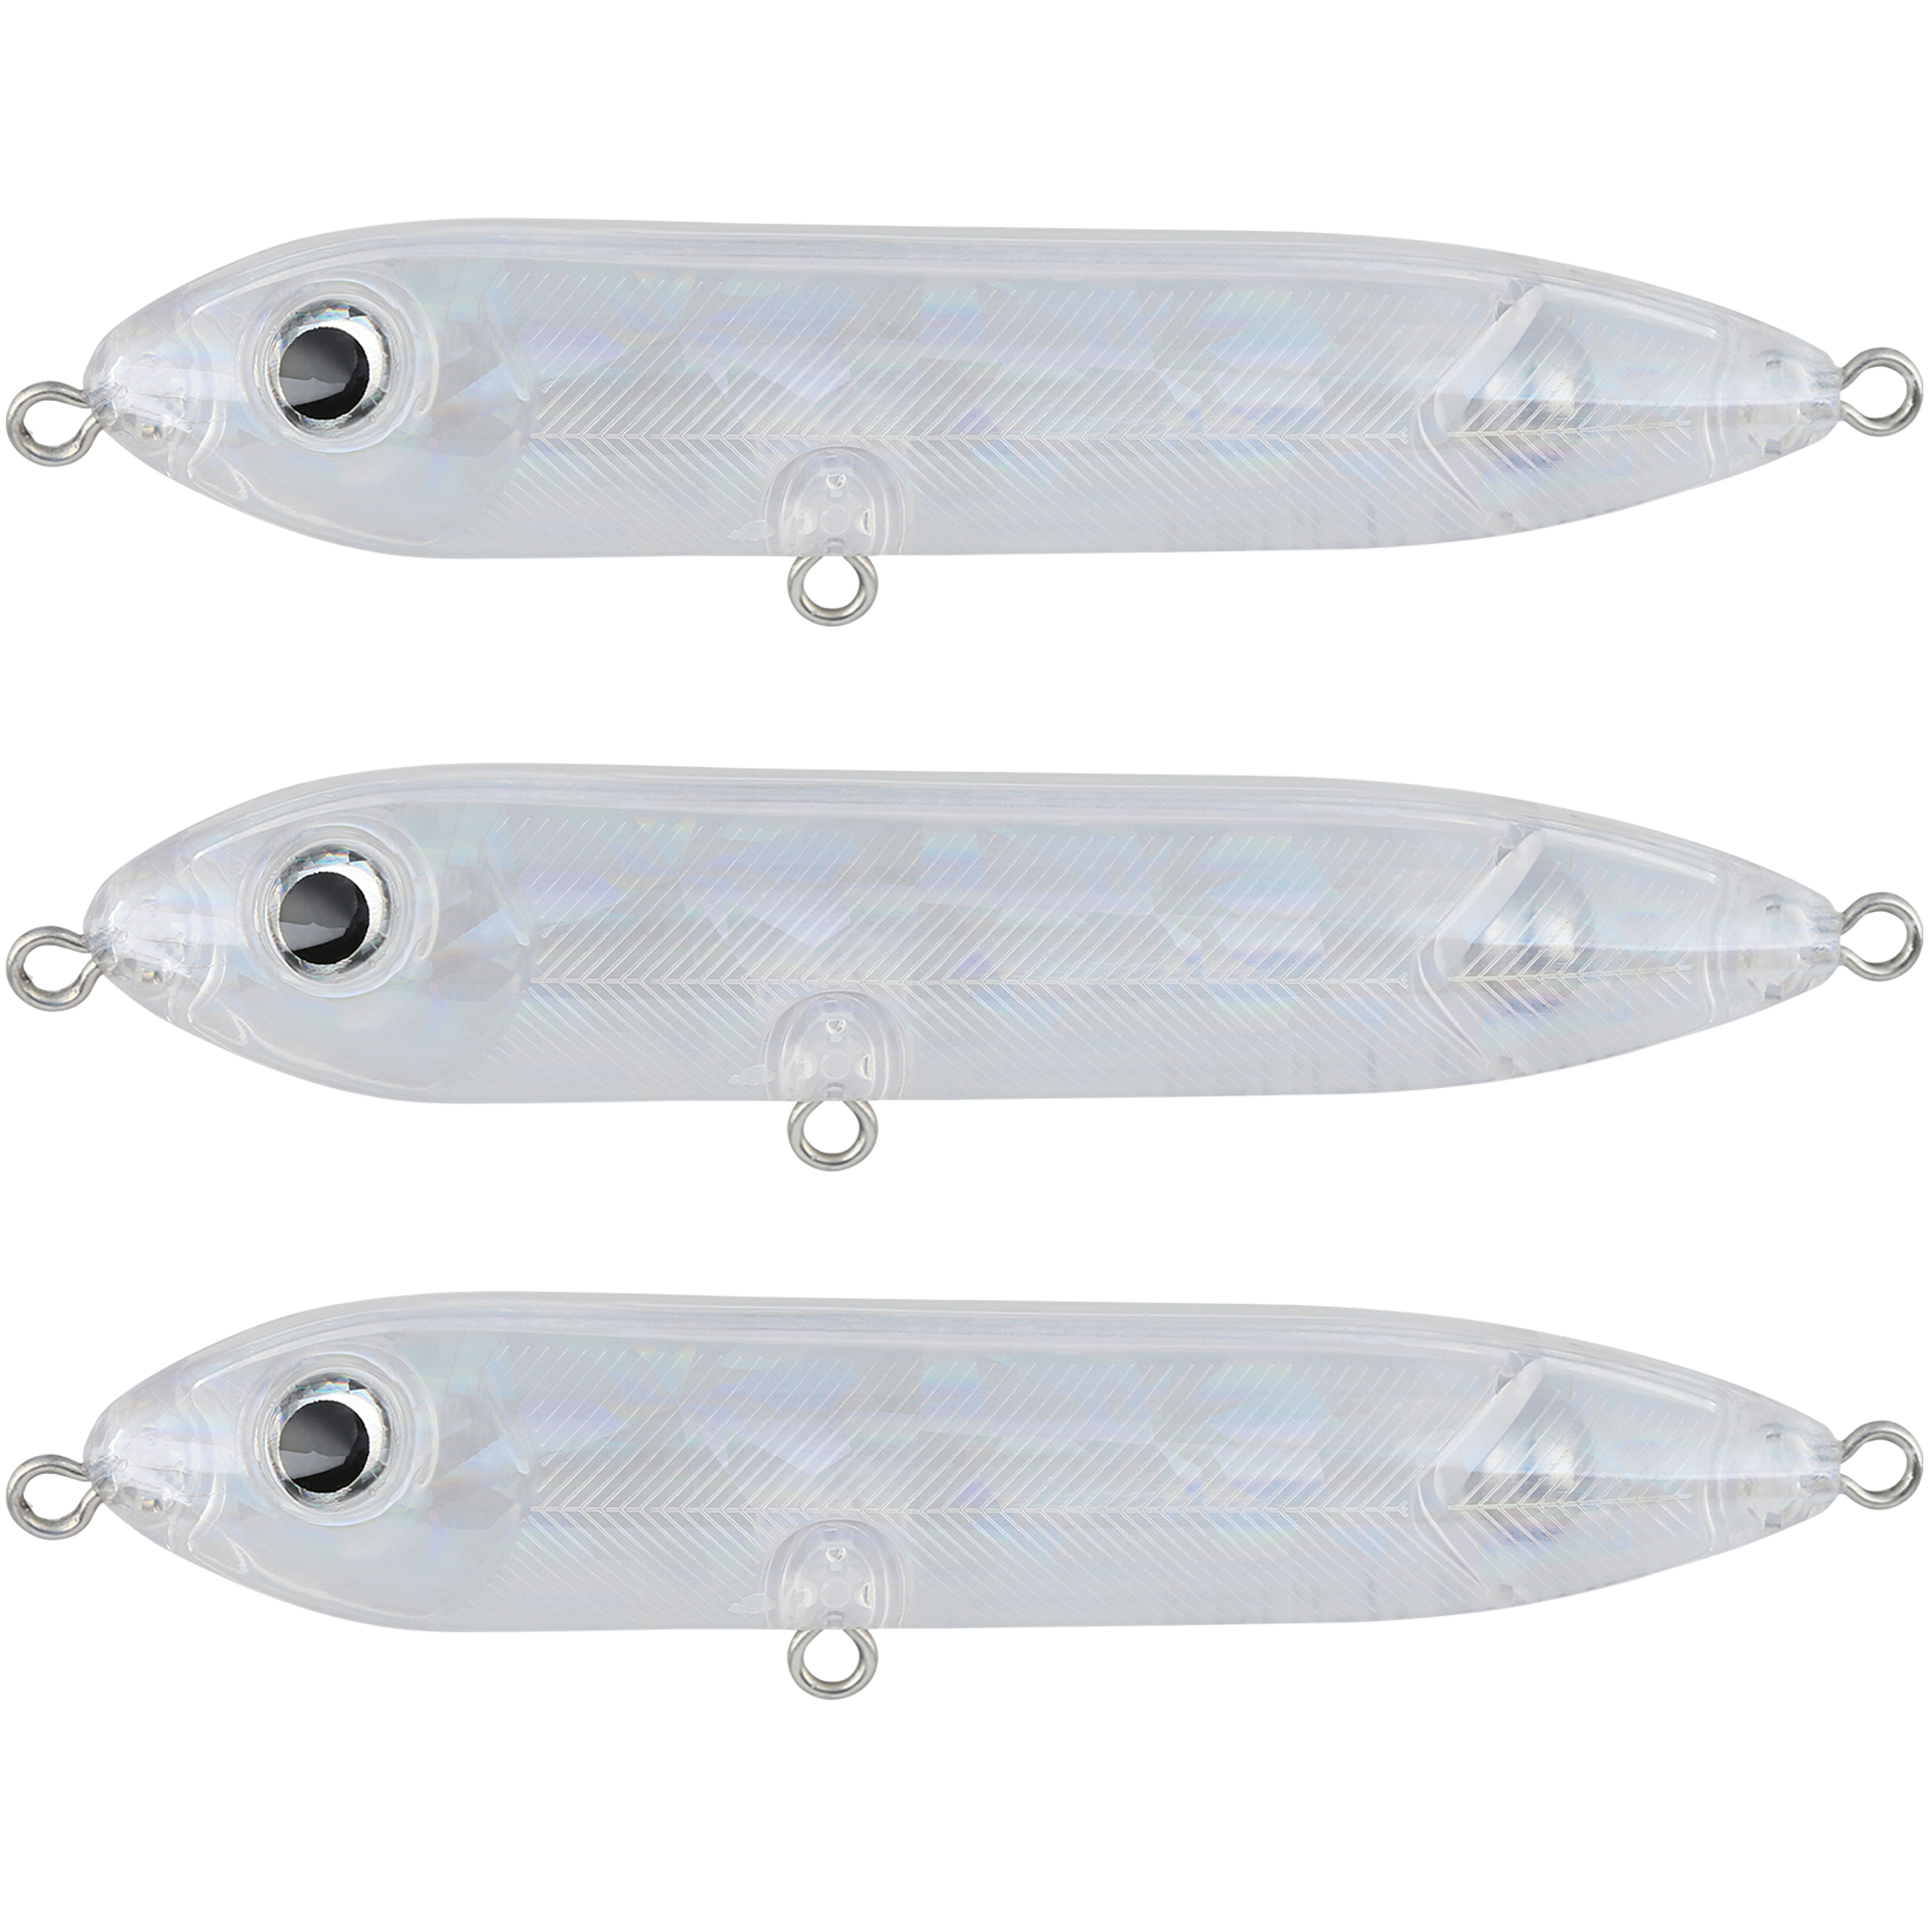  TACKLE BEACON - Catfish Pre-Rigged Spring Dough Bait